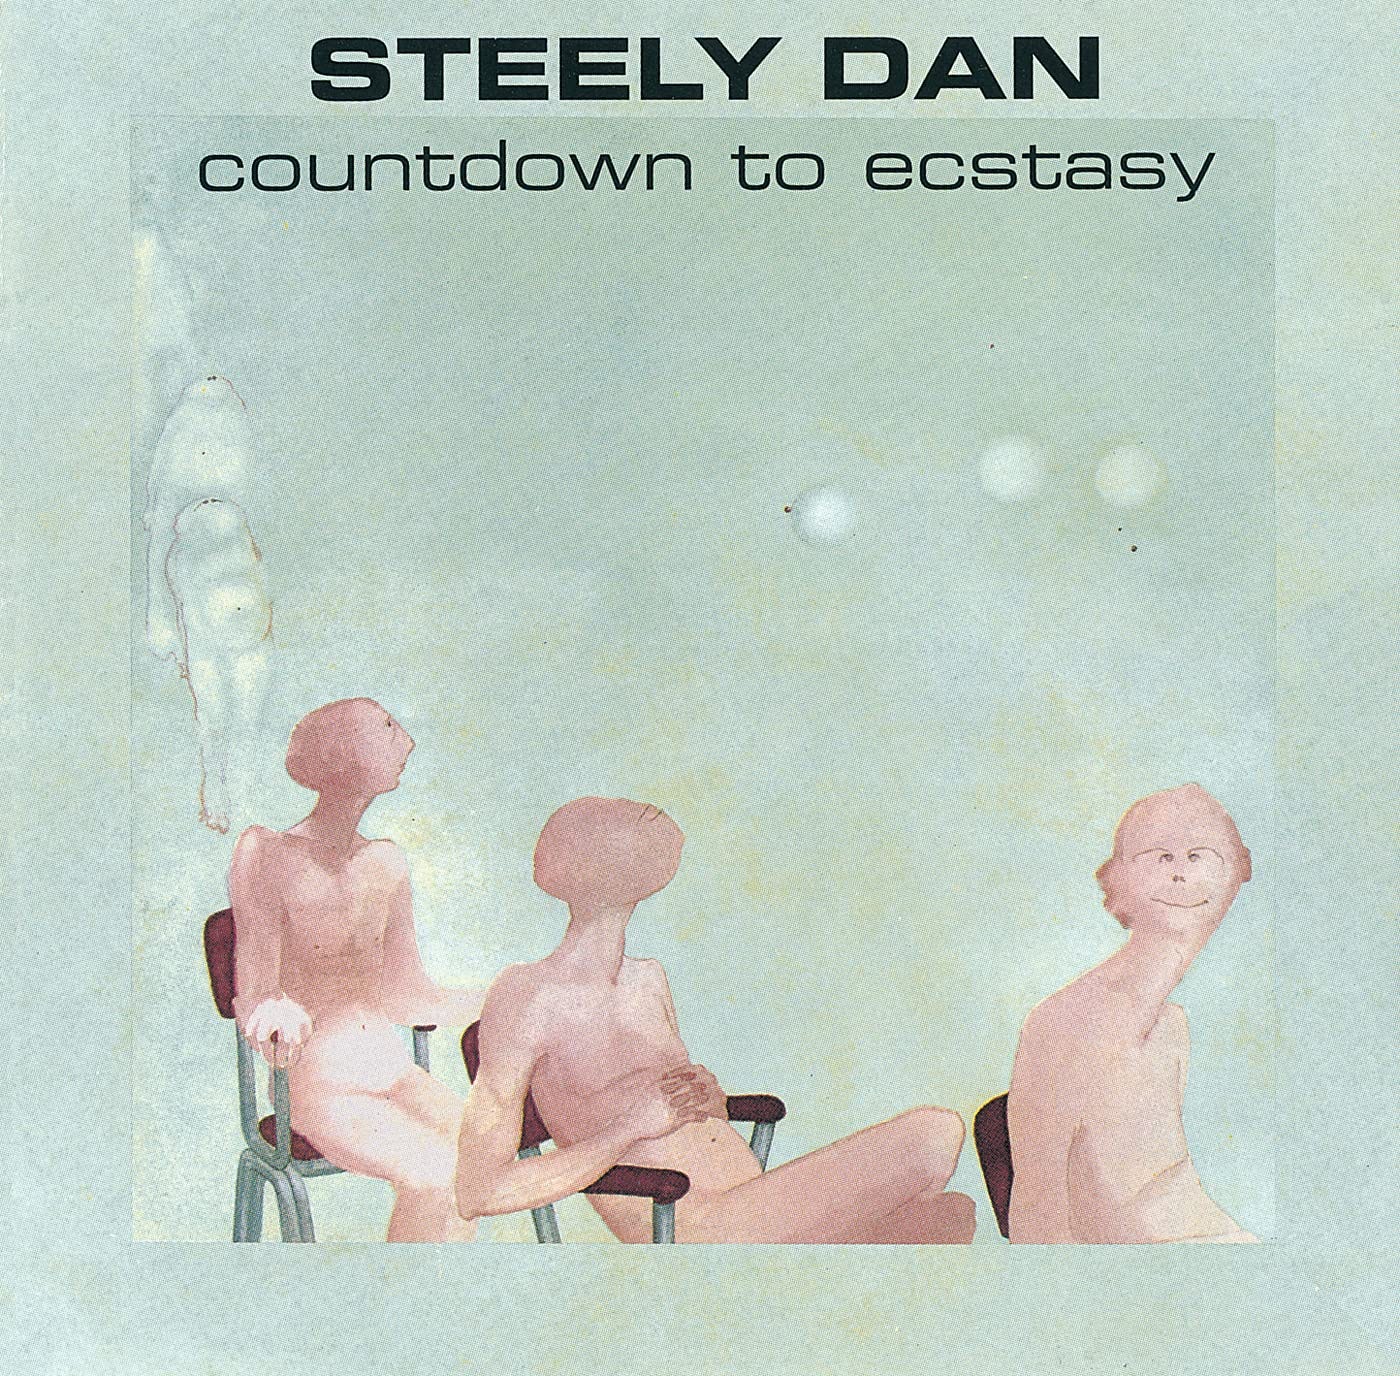 Full Albums: Steely Dan's 'Countdown to Ecstasy' - Cover Me